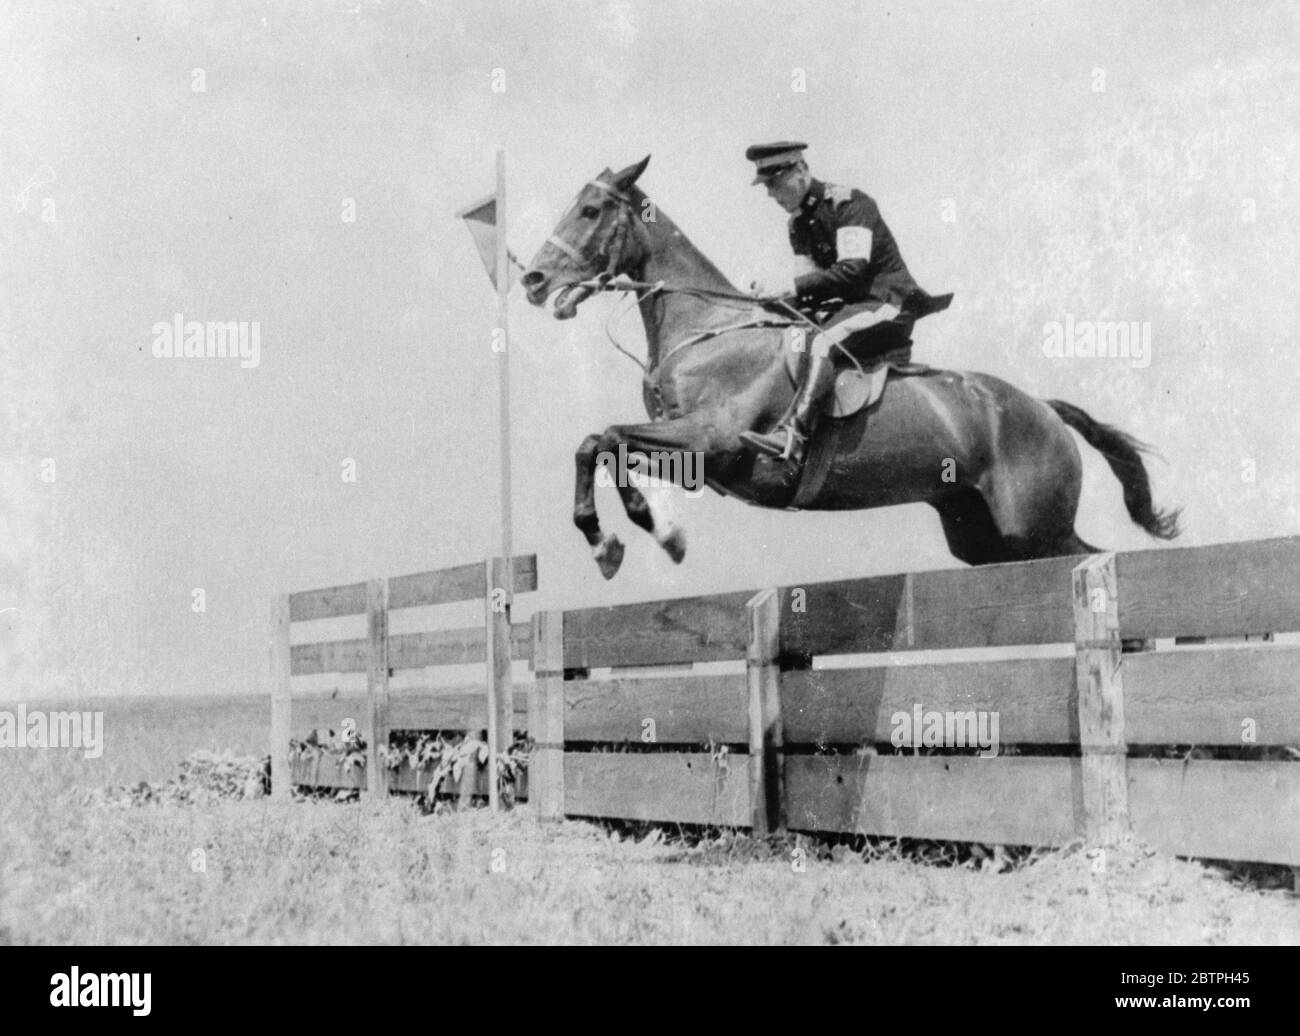 In Olympic pentathlon . Vernon W Barlow of Great Britain clears one of the jumps during the riding event , the modern pentathlon at the Los Angeles Olympiad . 1932 Stock Photo